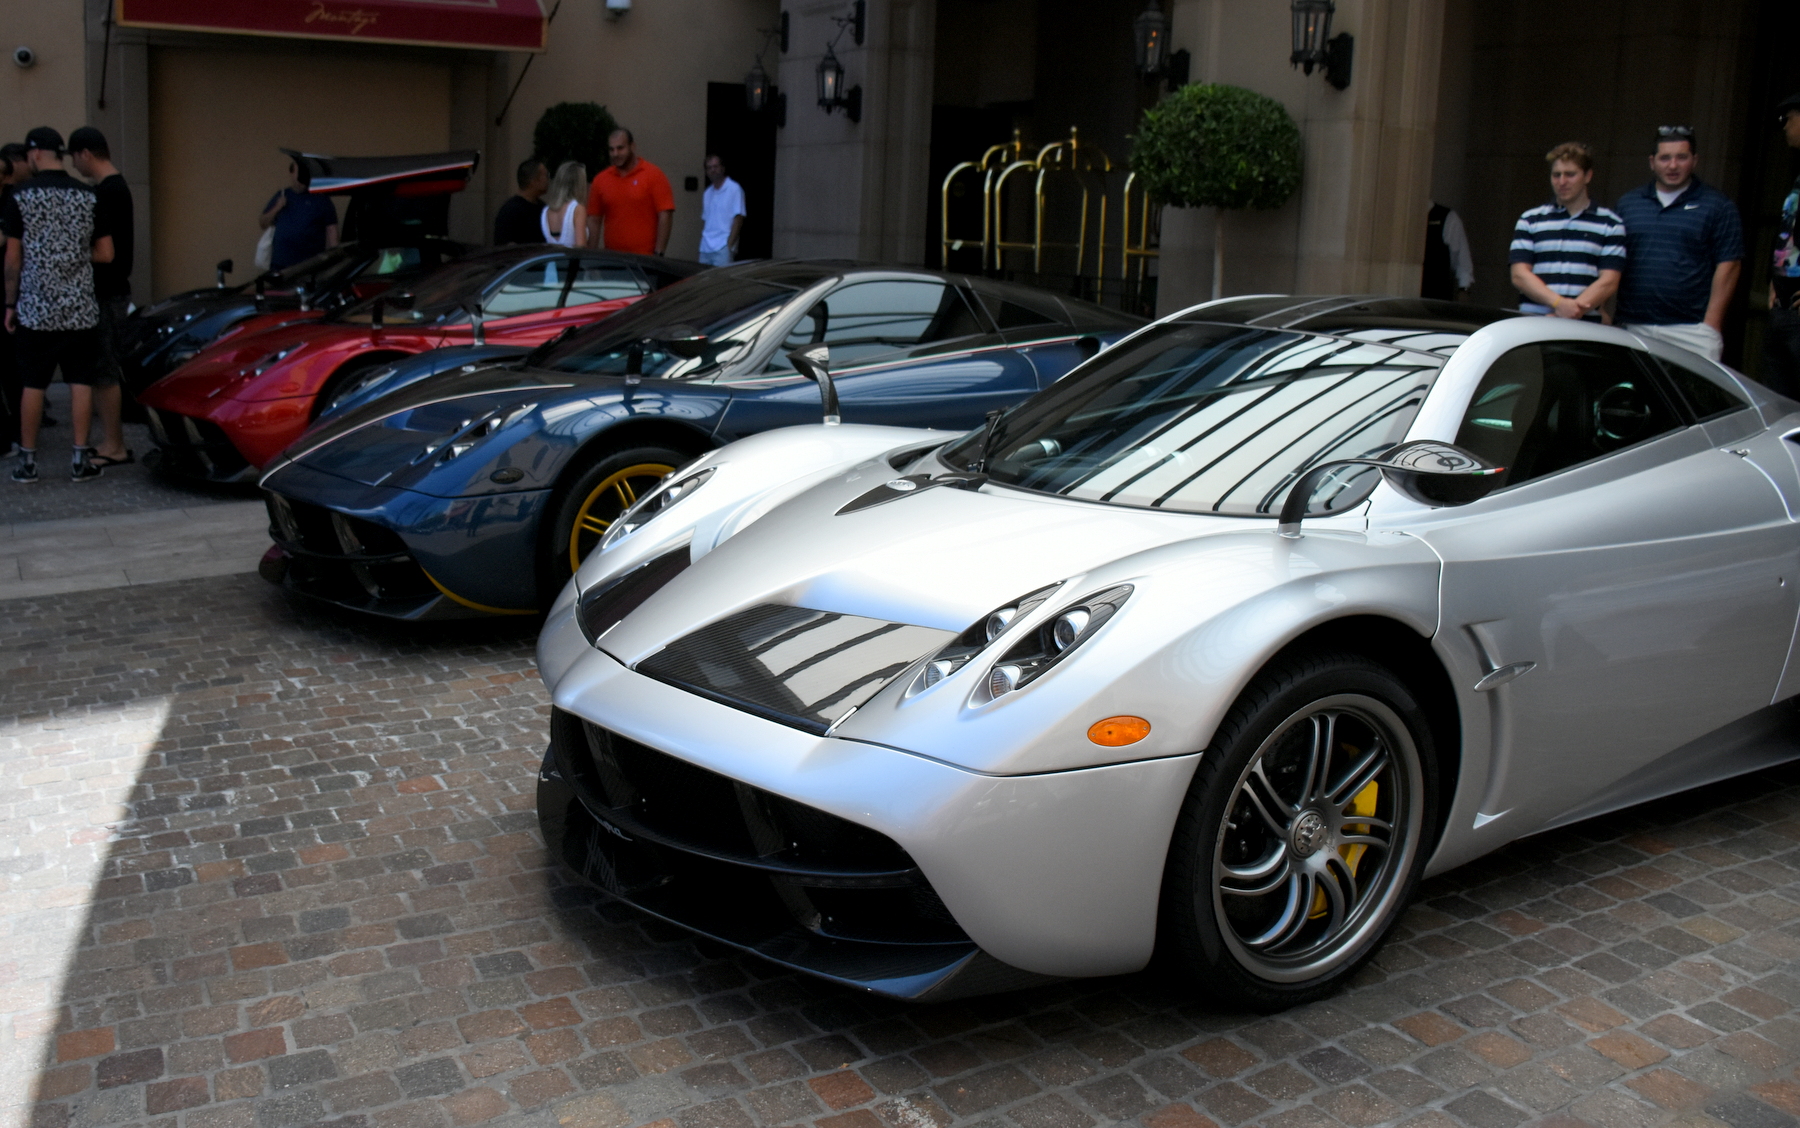 Eleven Pagani Huayras on the Streets of Beverly Hills